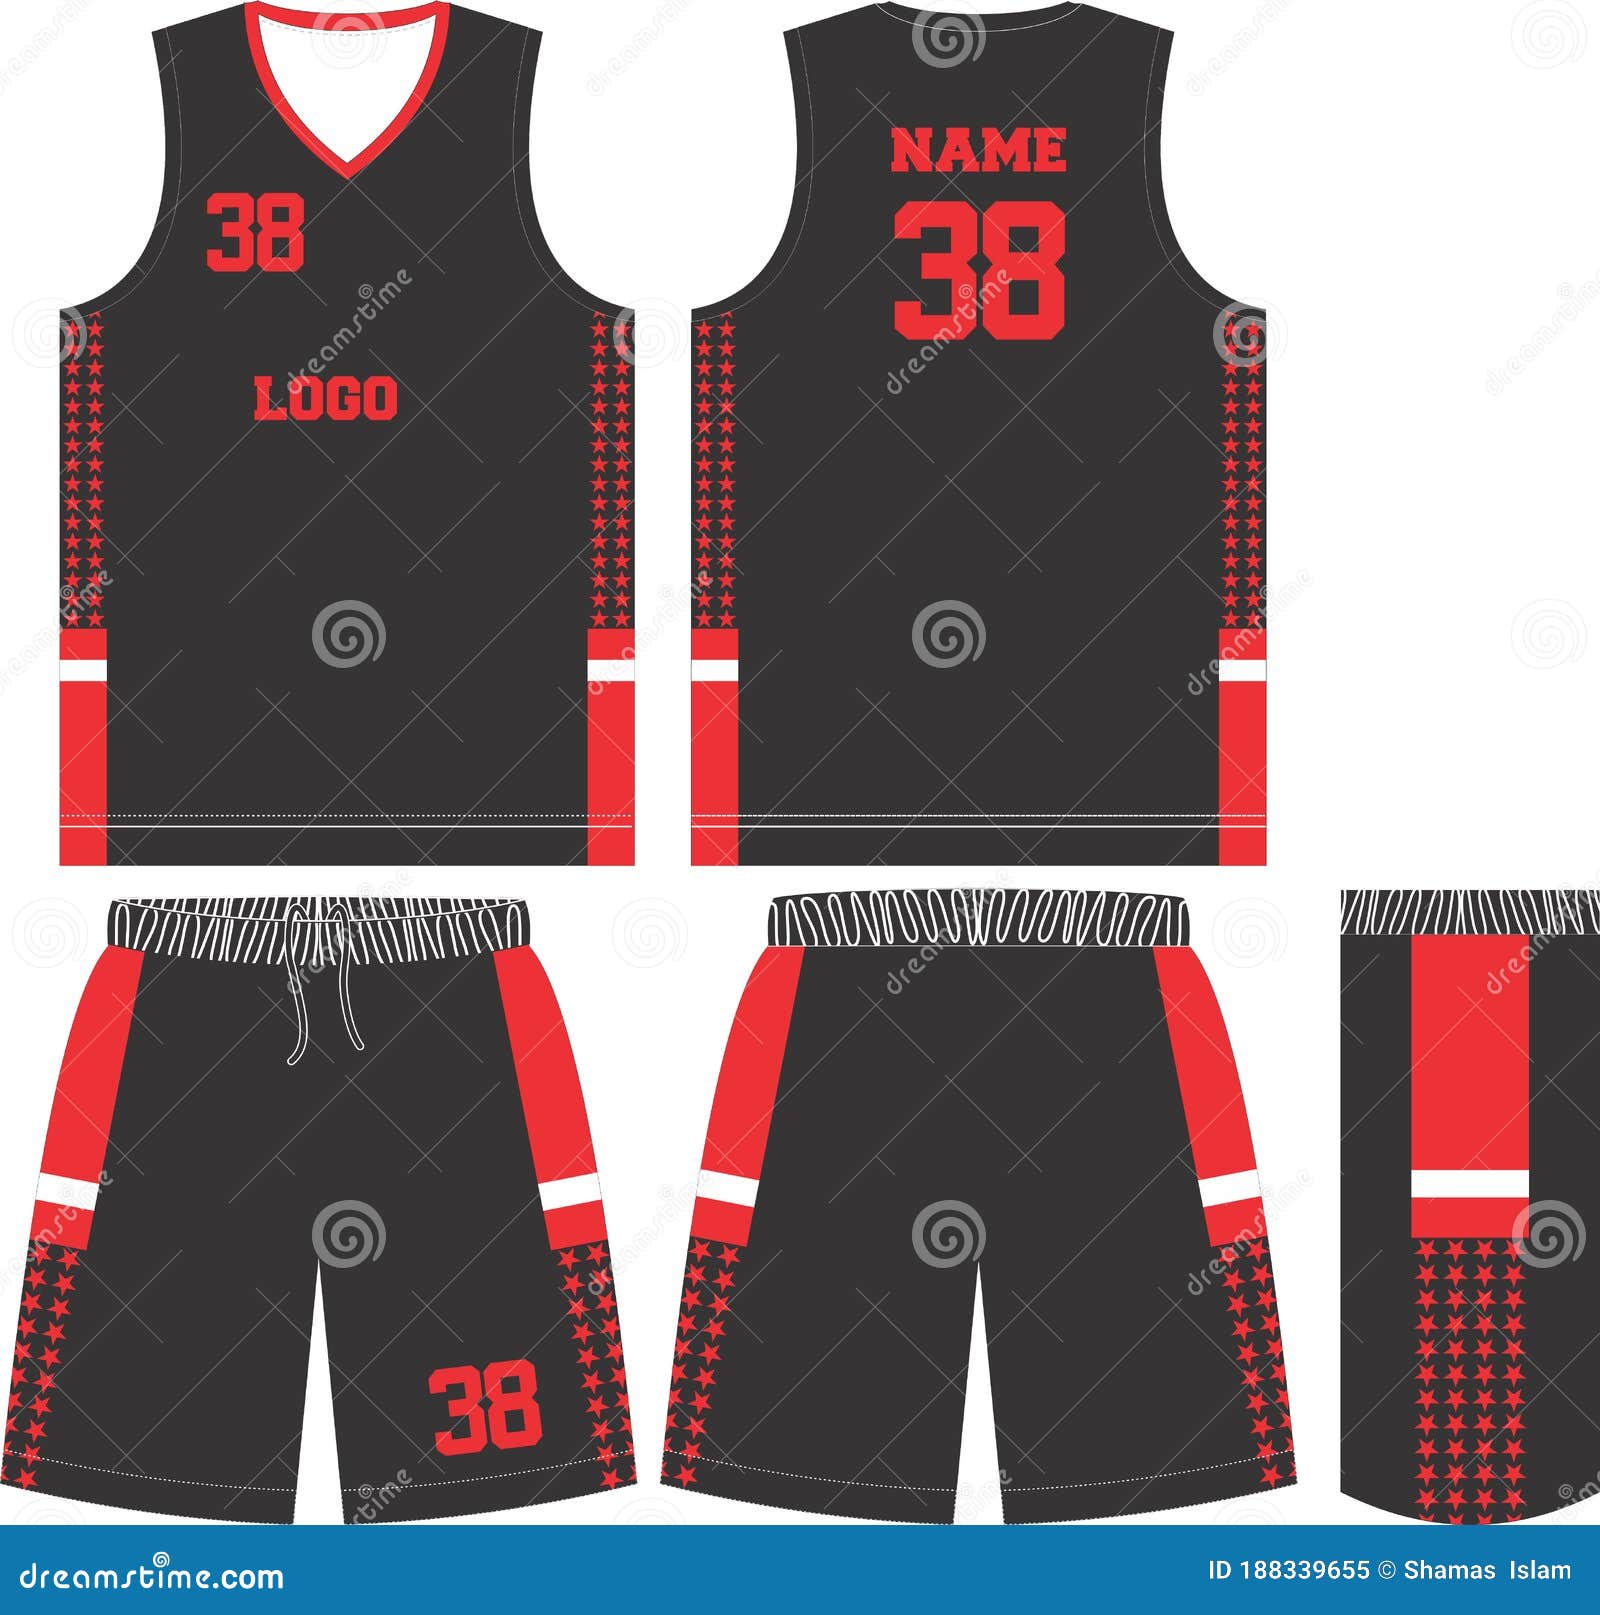 Basketball Uniform Custom Design Mockups Templates Design For Basketball Club T Shirt Mockup For Basketball Jersey Front View Stock Vector Illustration Of Neck Isolated 188339655